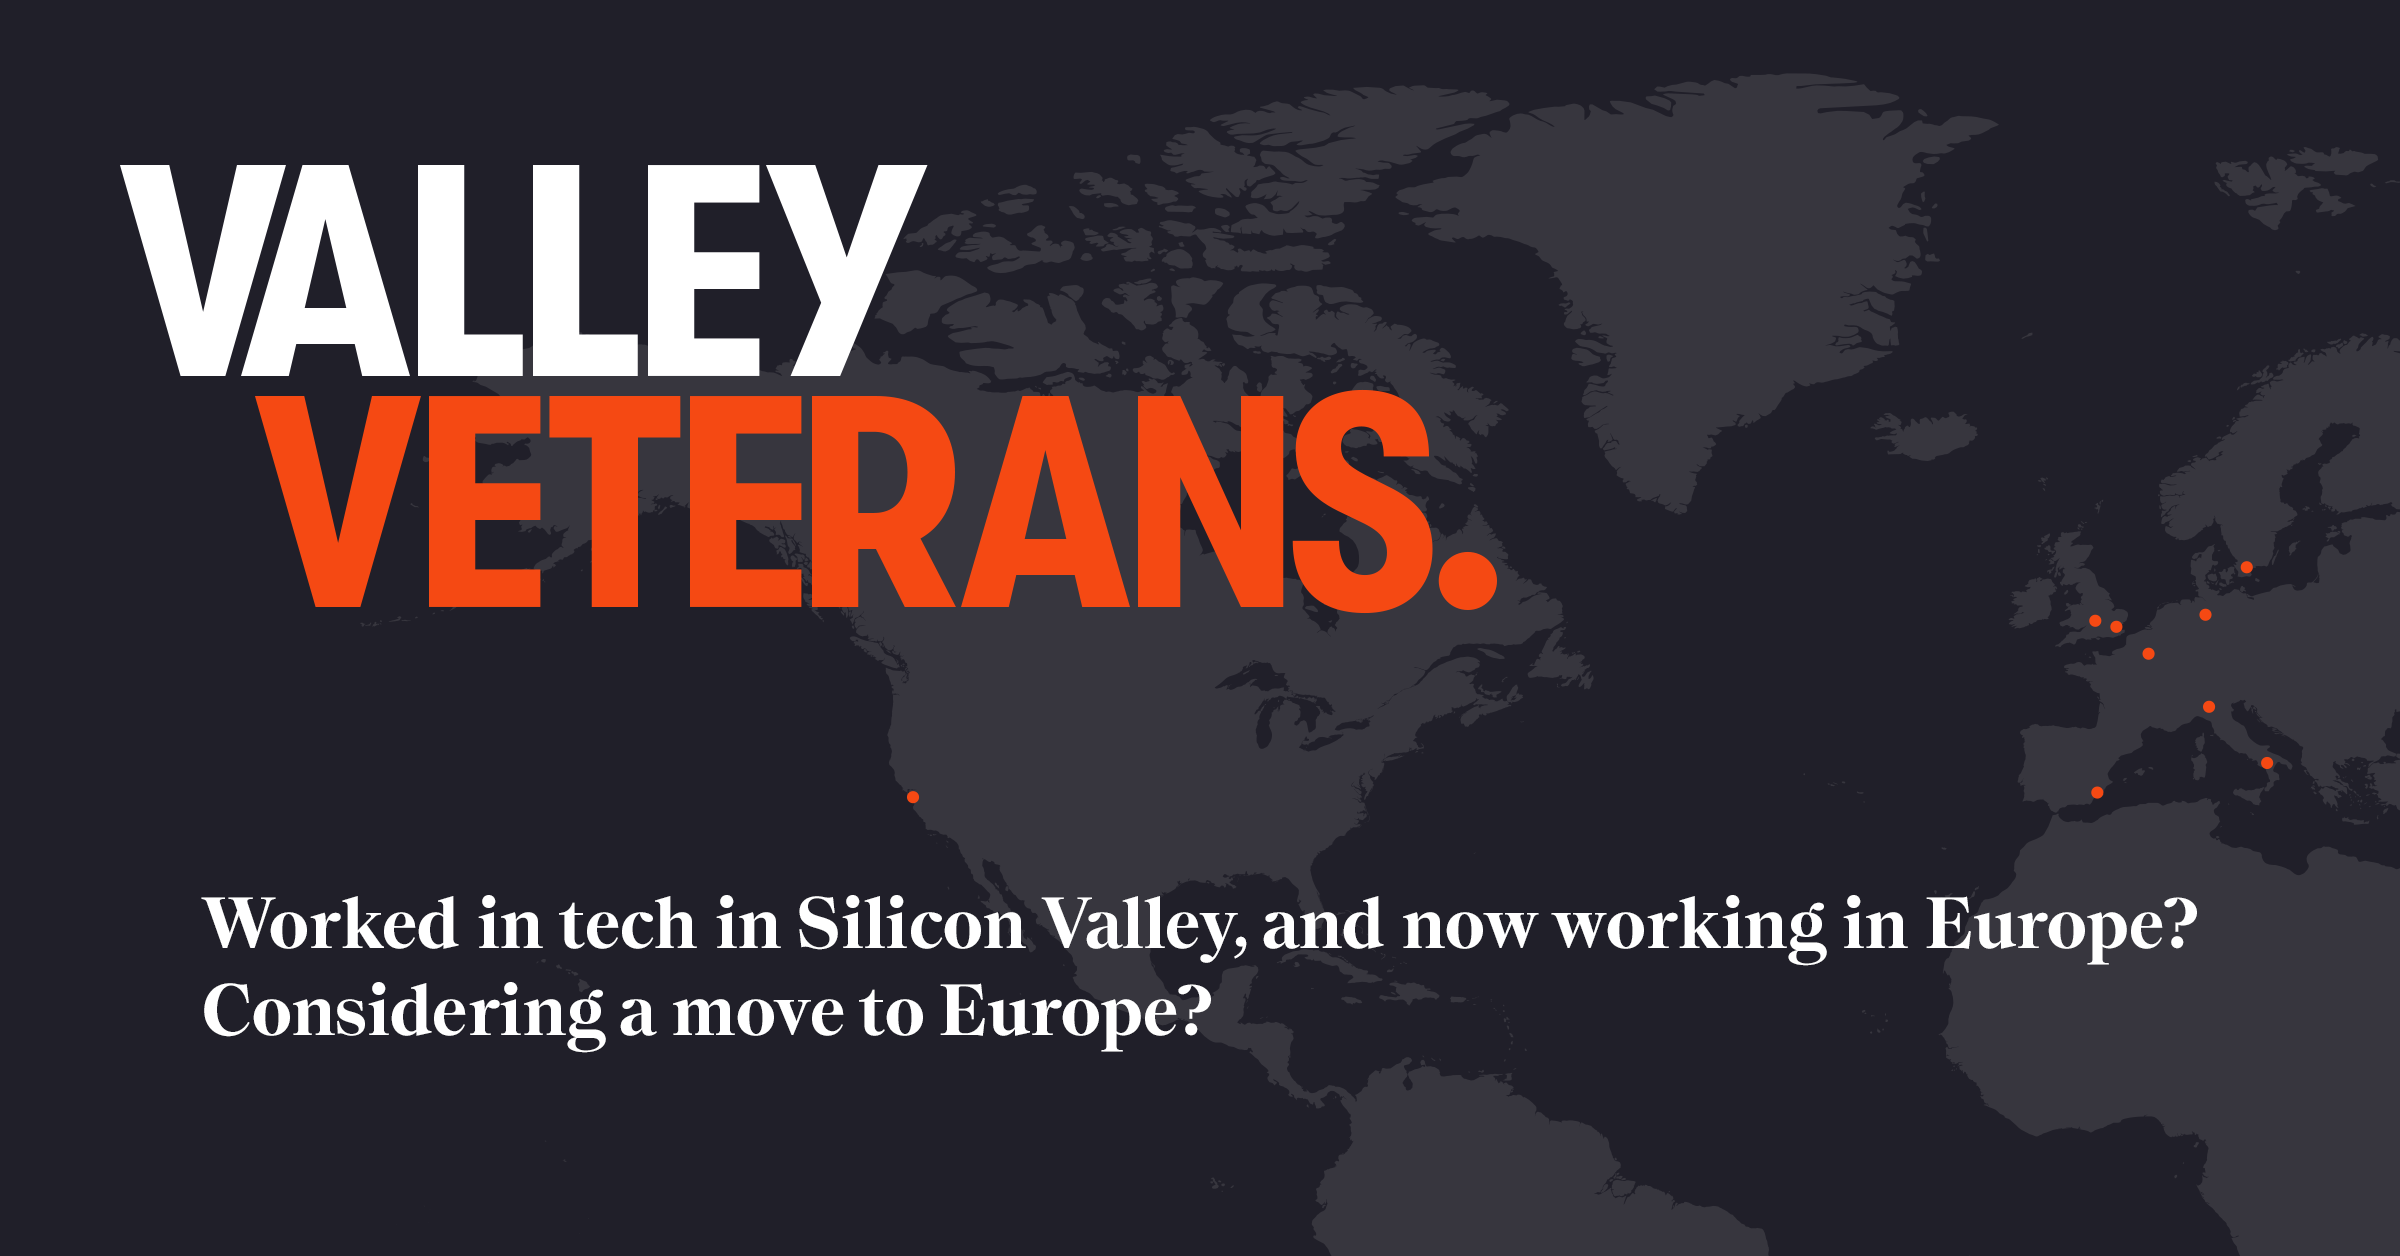 Join the Valley Veterans Community